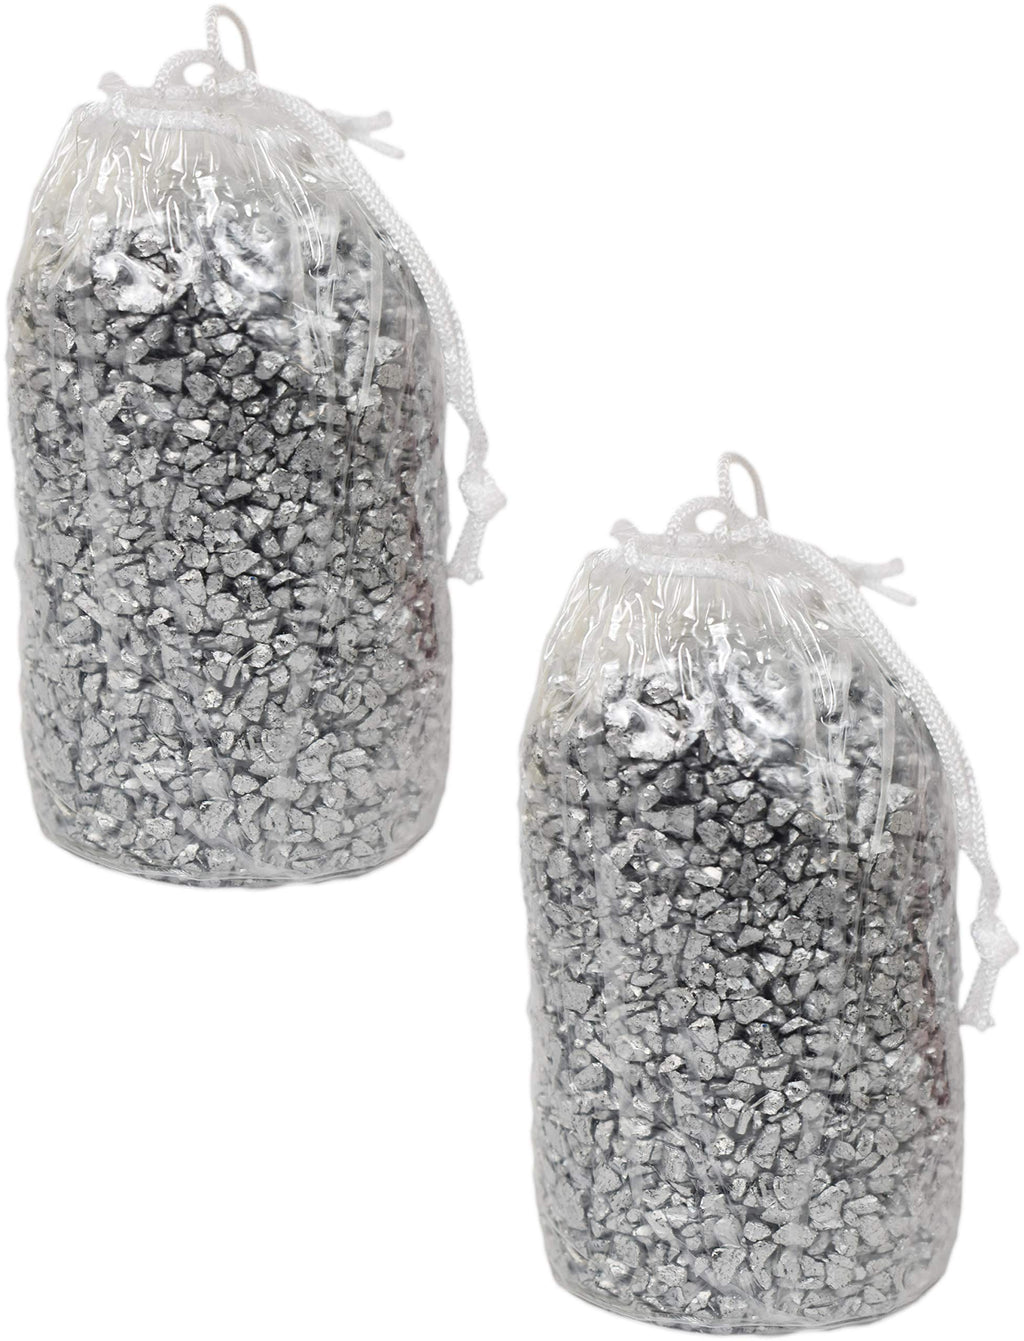 Set of 2 Bags of Silver Crushed Glass - Roughly 4lbs - Decorative Stones Perfect for Aquariums, Vase Fillers, Table Scatter, Scrapbooking and Much More! Beautiful Gems! (Panacea Silver Crushed Glass) - PawsPlanet Australia